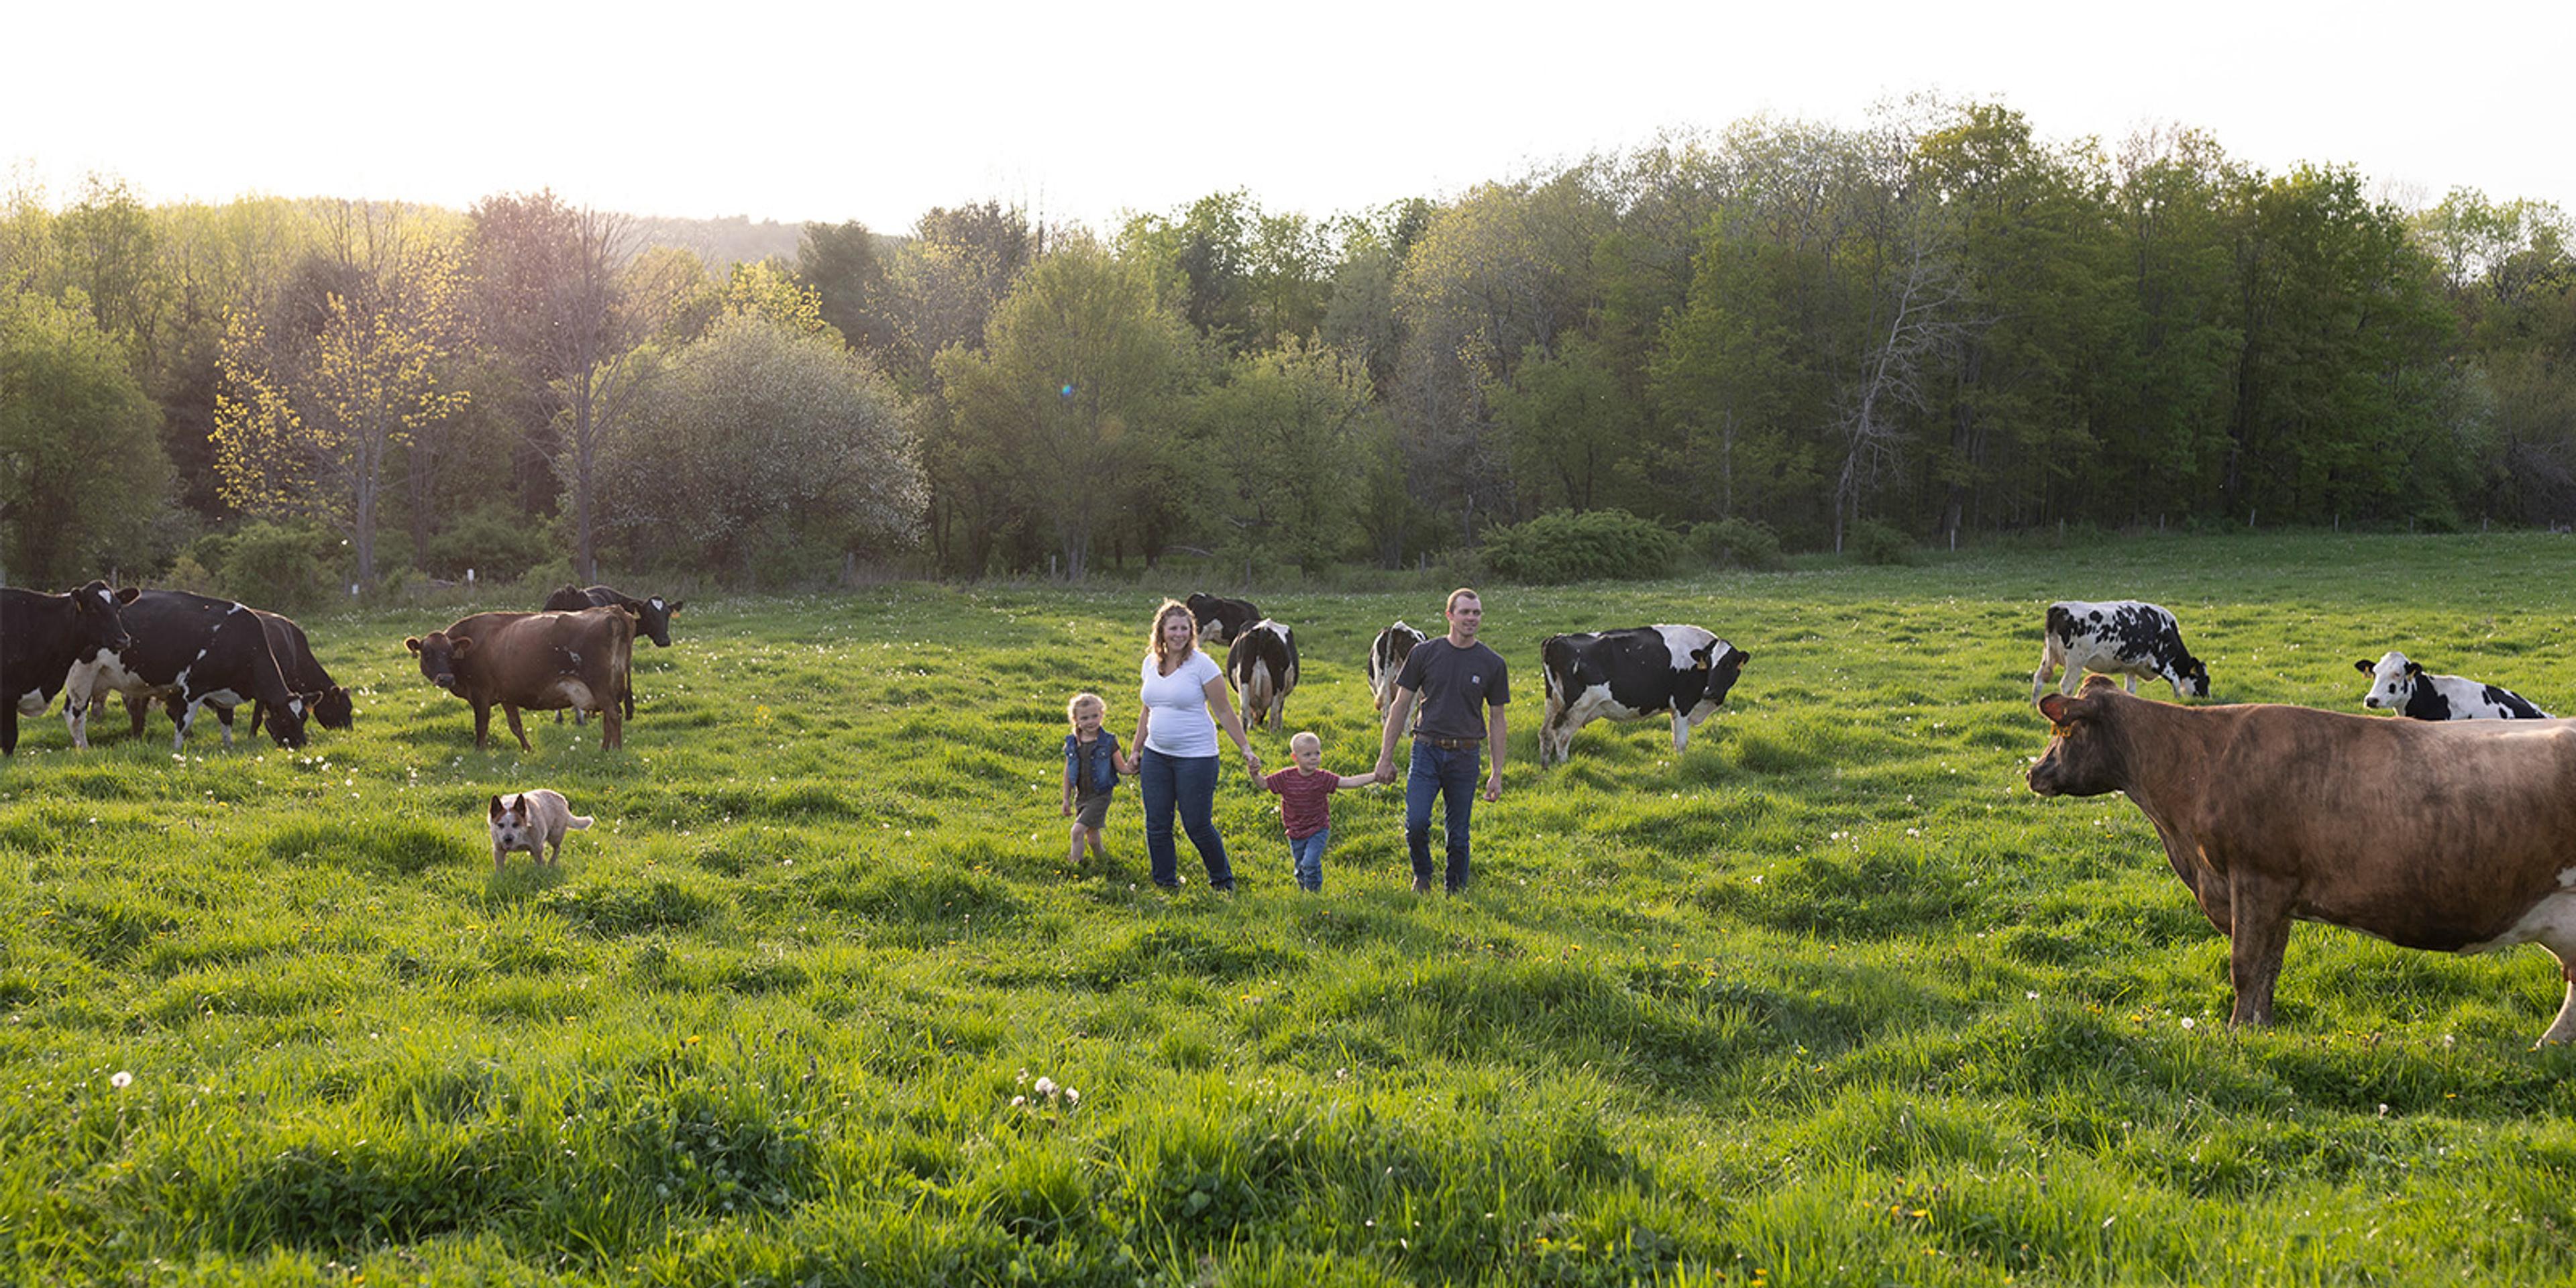 Organic dairy cows watch Madeline and Bruce Poole and their two children as they walk across a field.